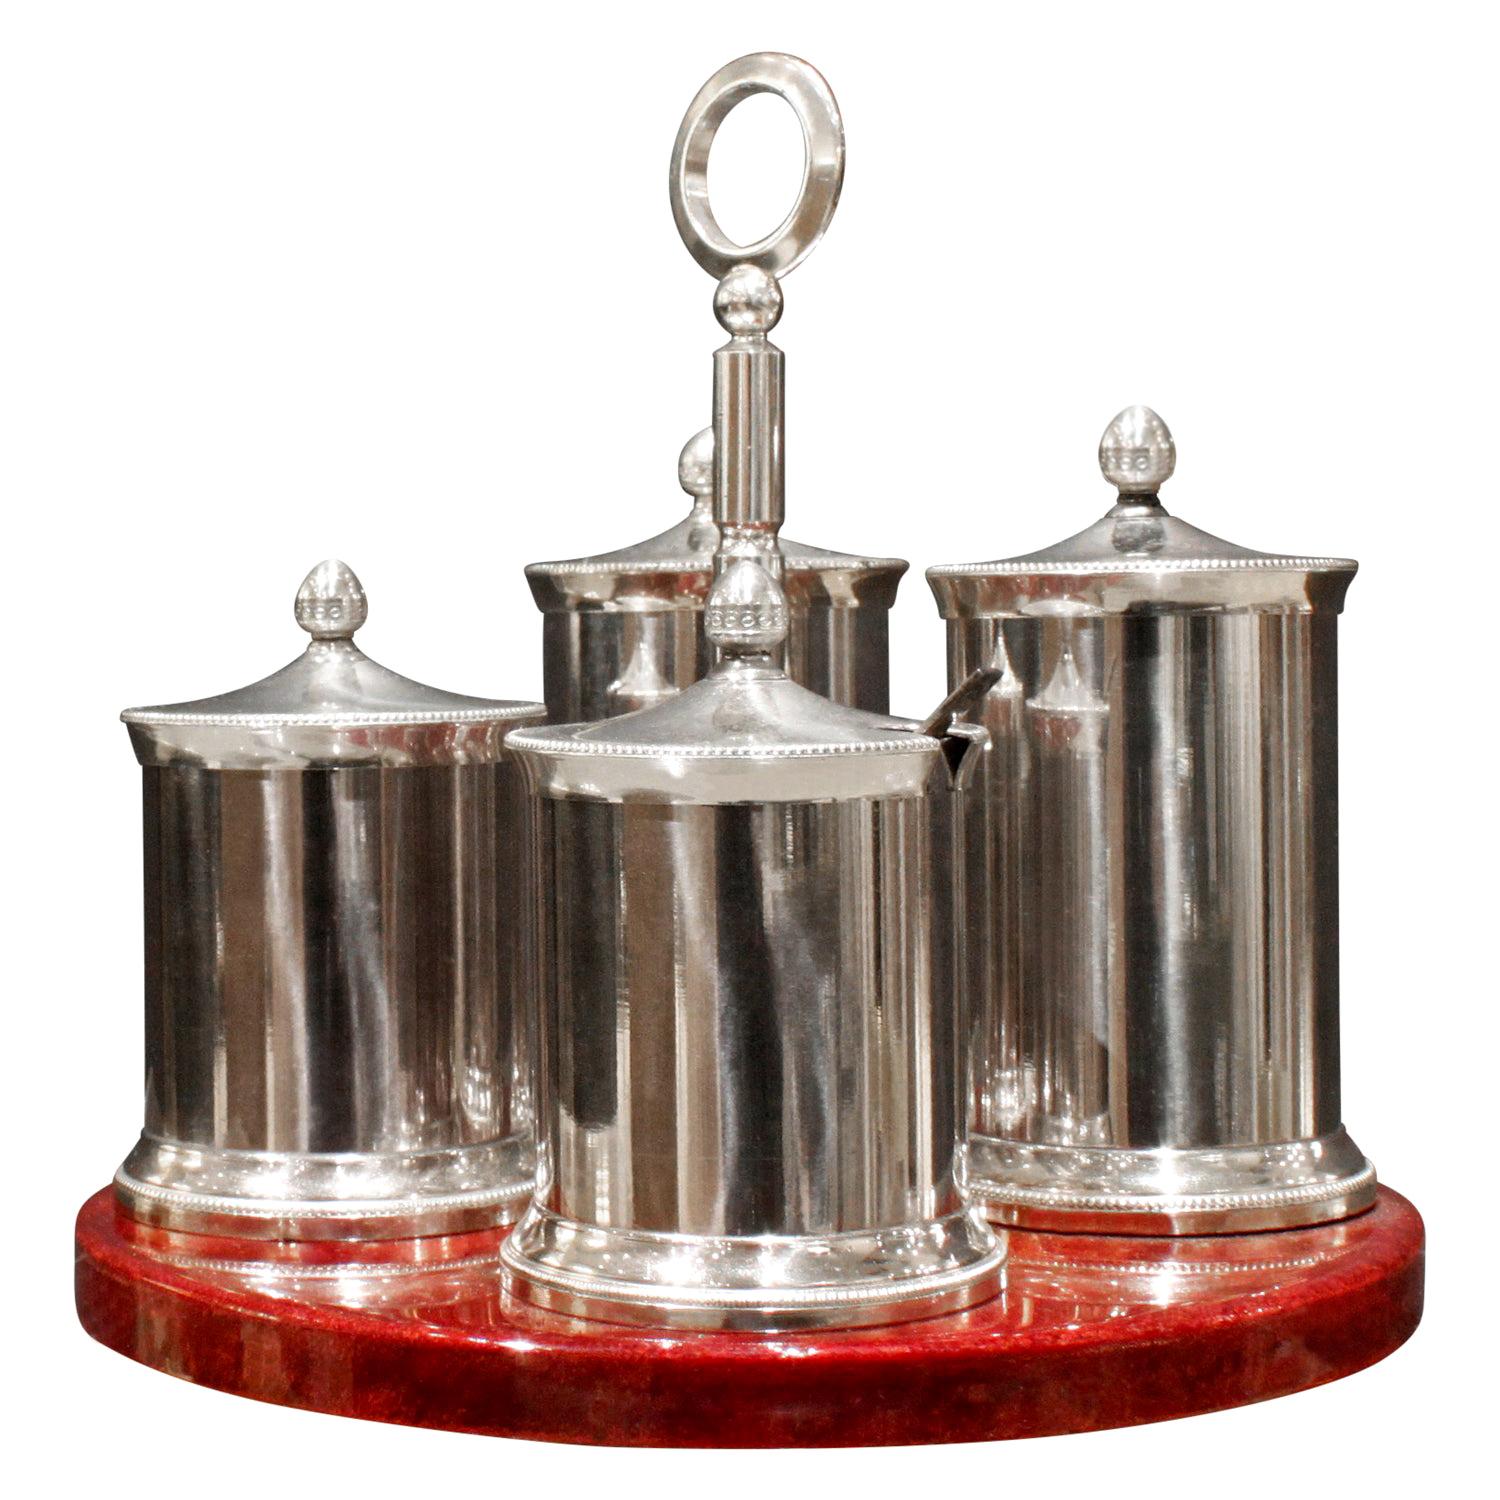 Aldo Tura Cruet Set in Red Lacquered Goatskin and Stainless Steel 1970s 'Signed' For Sale